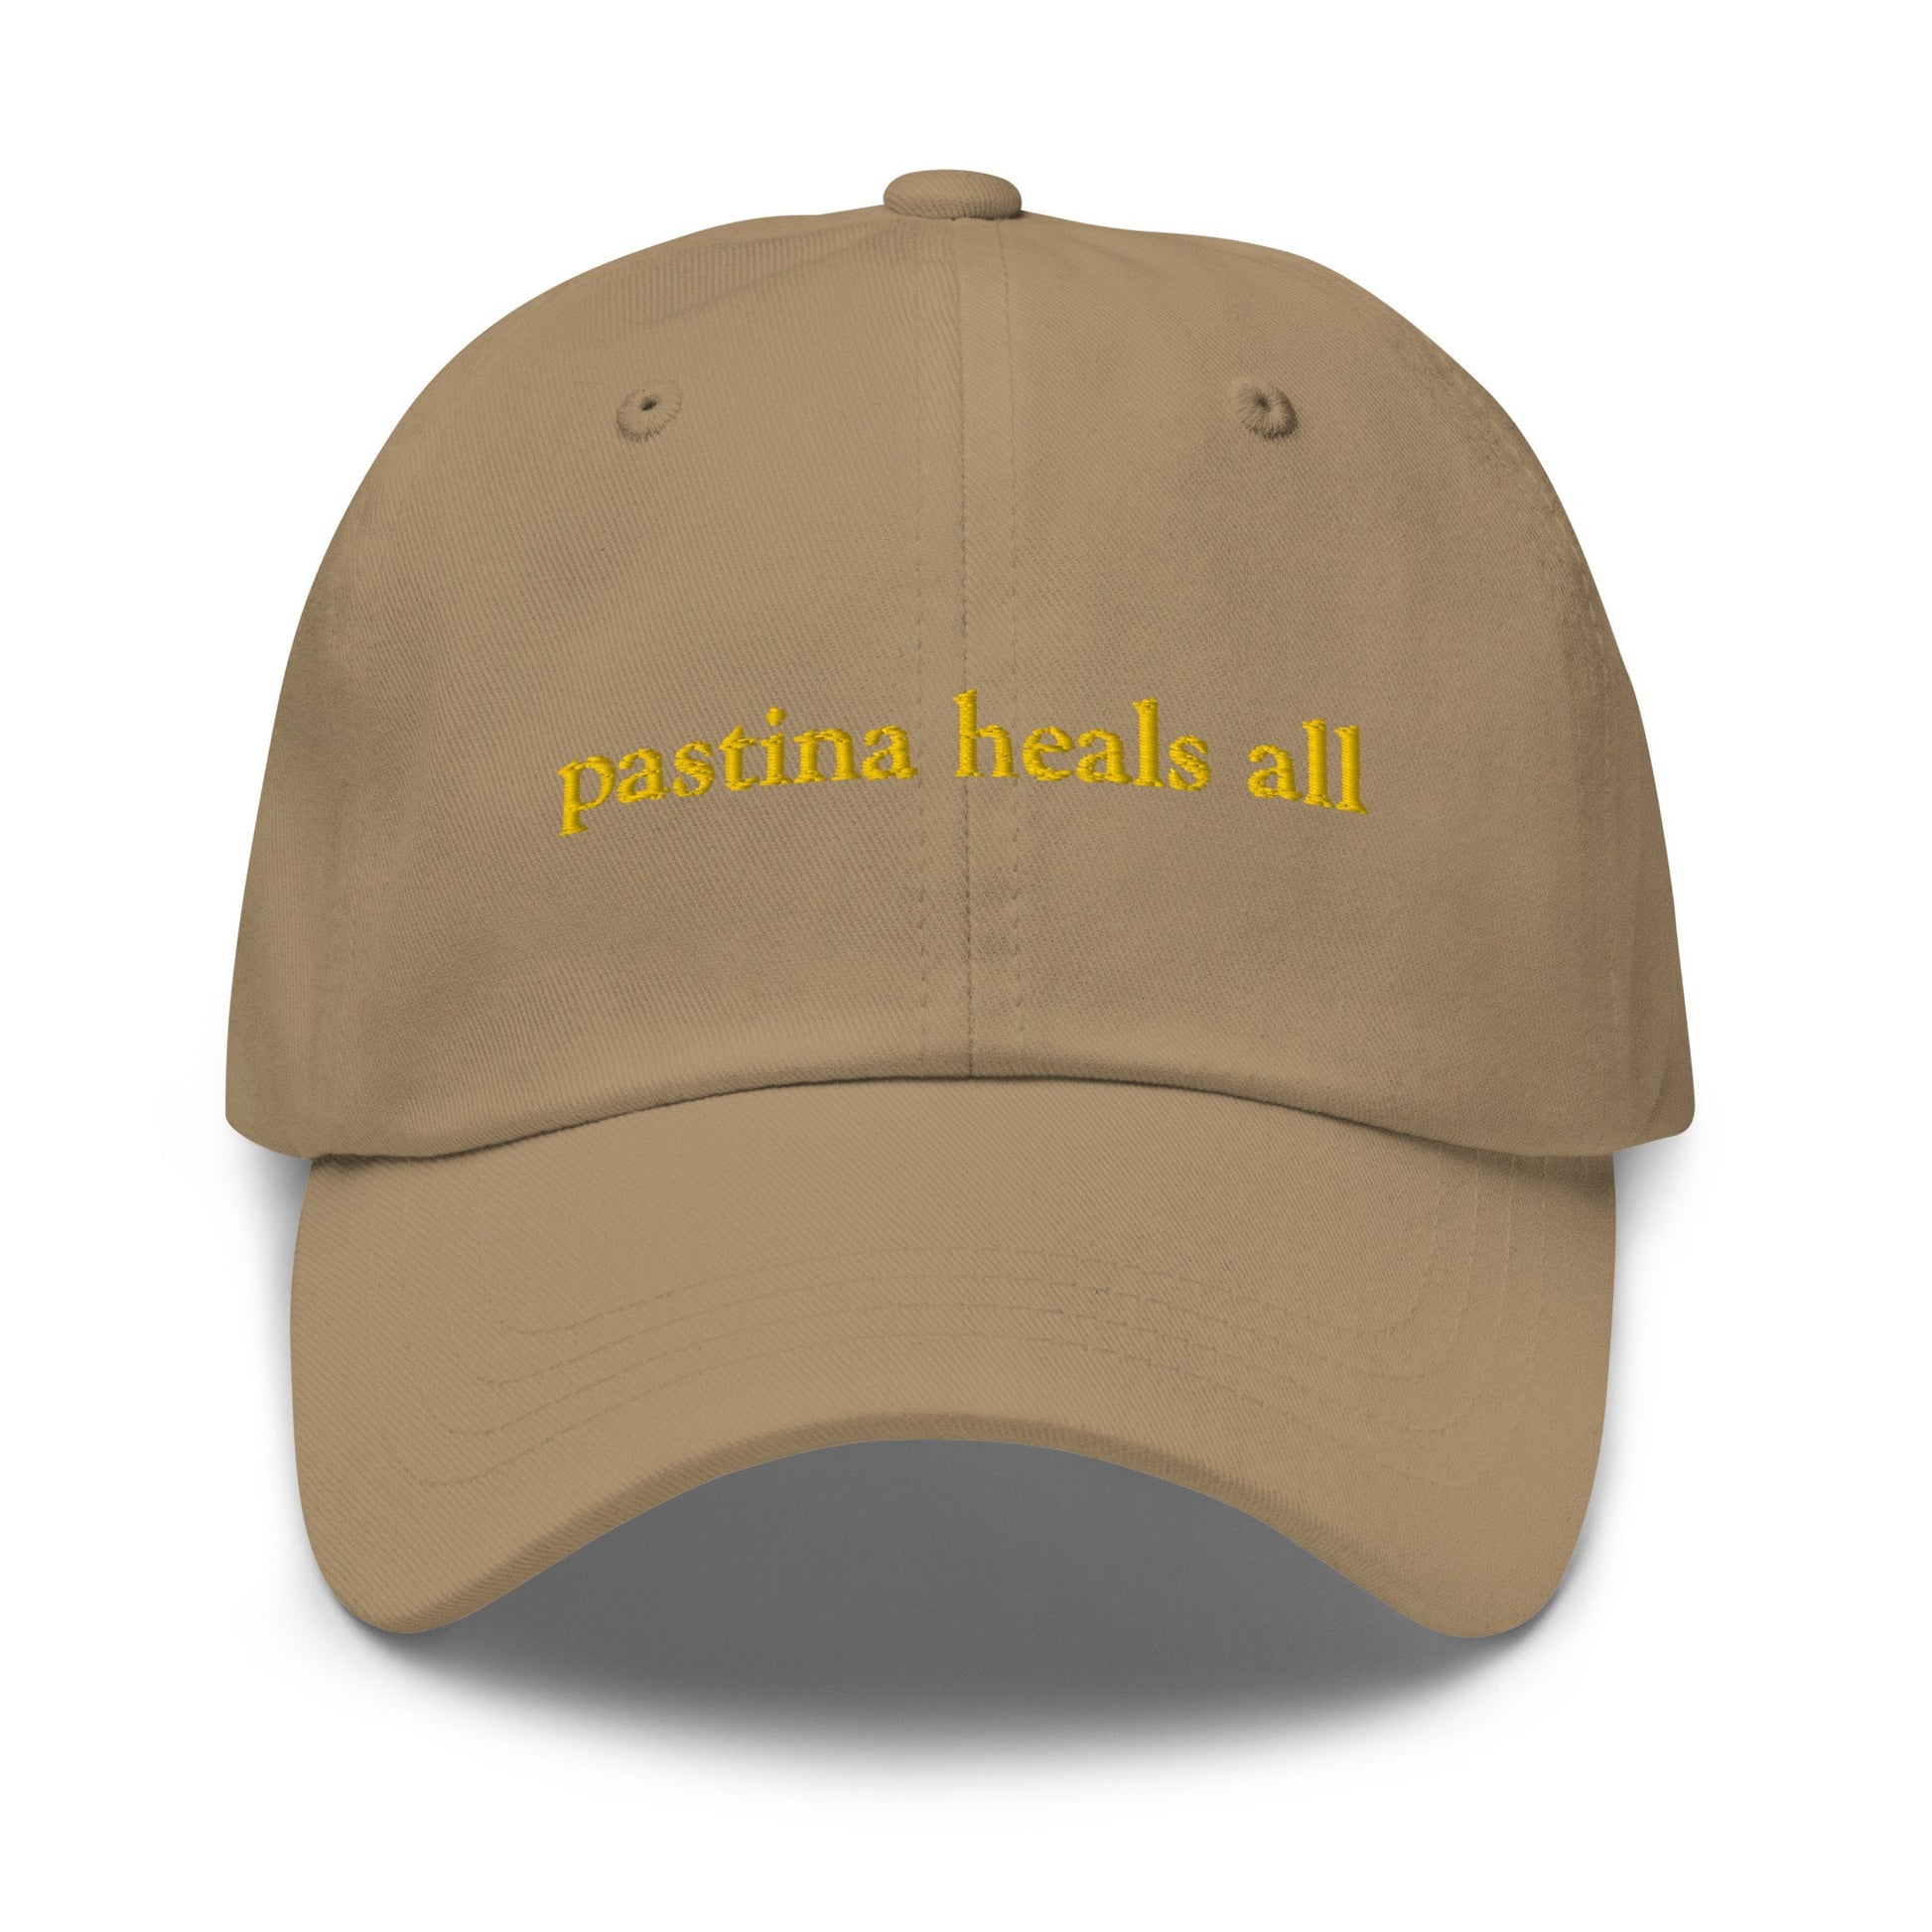 Pastina Dad Hat - Healing Broth of the Gods - Italian Brodo Home Remedy - Minimalist Cotton embroidered Cap - Multiple Colors